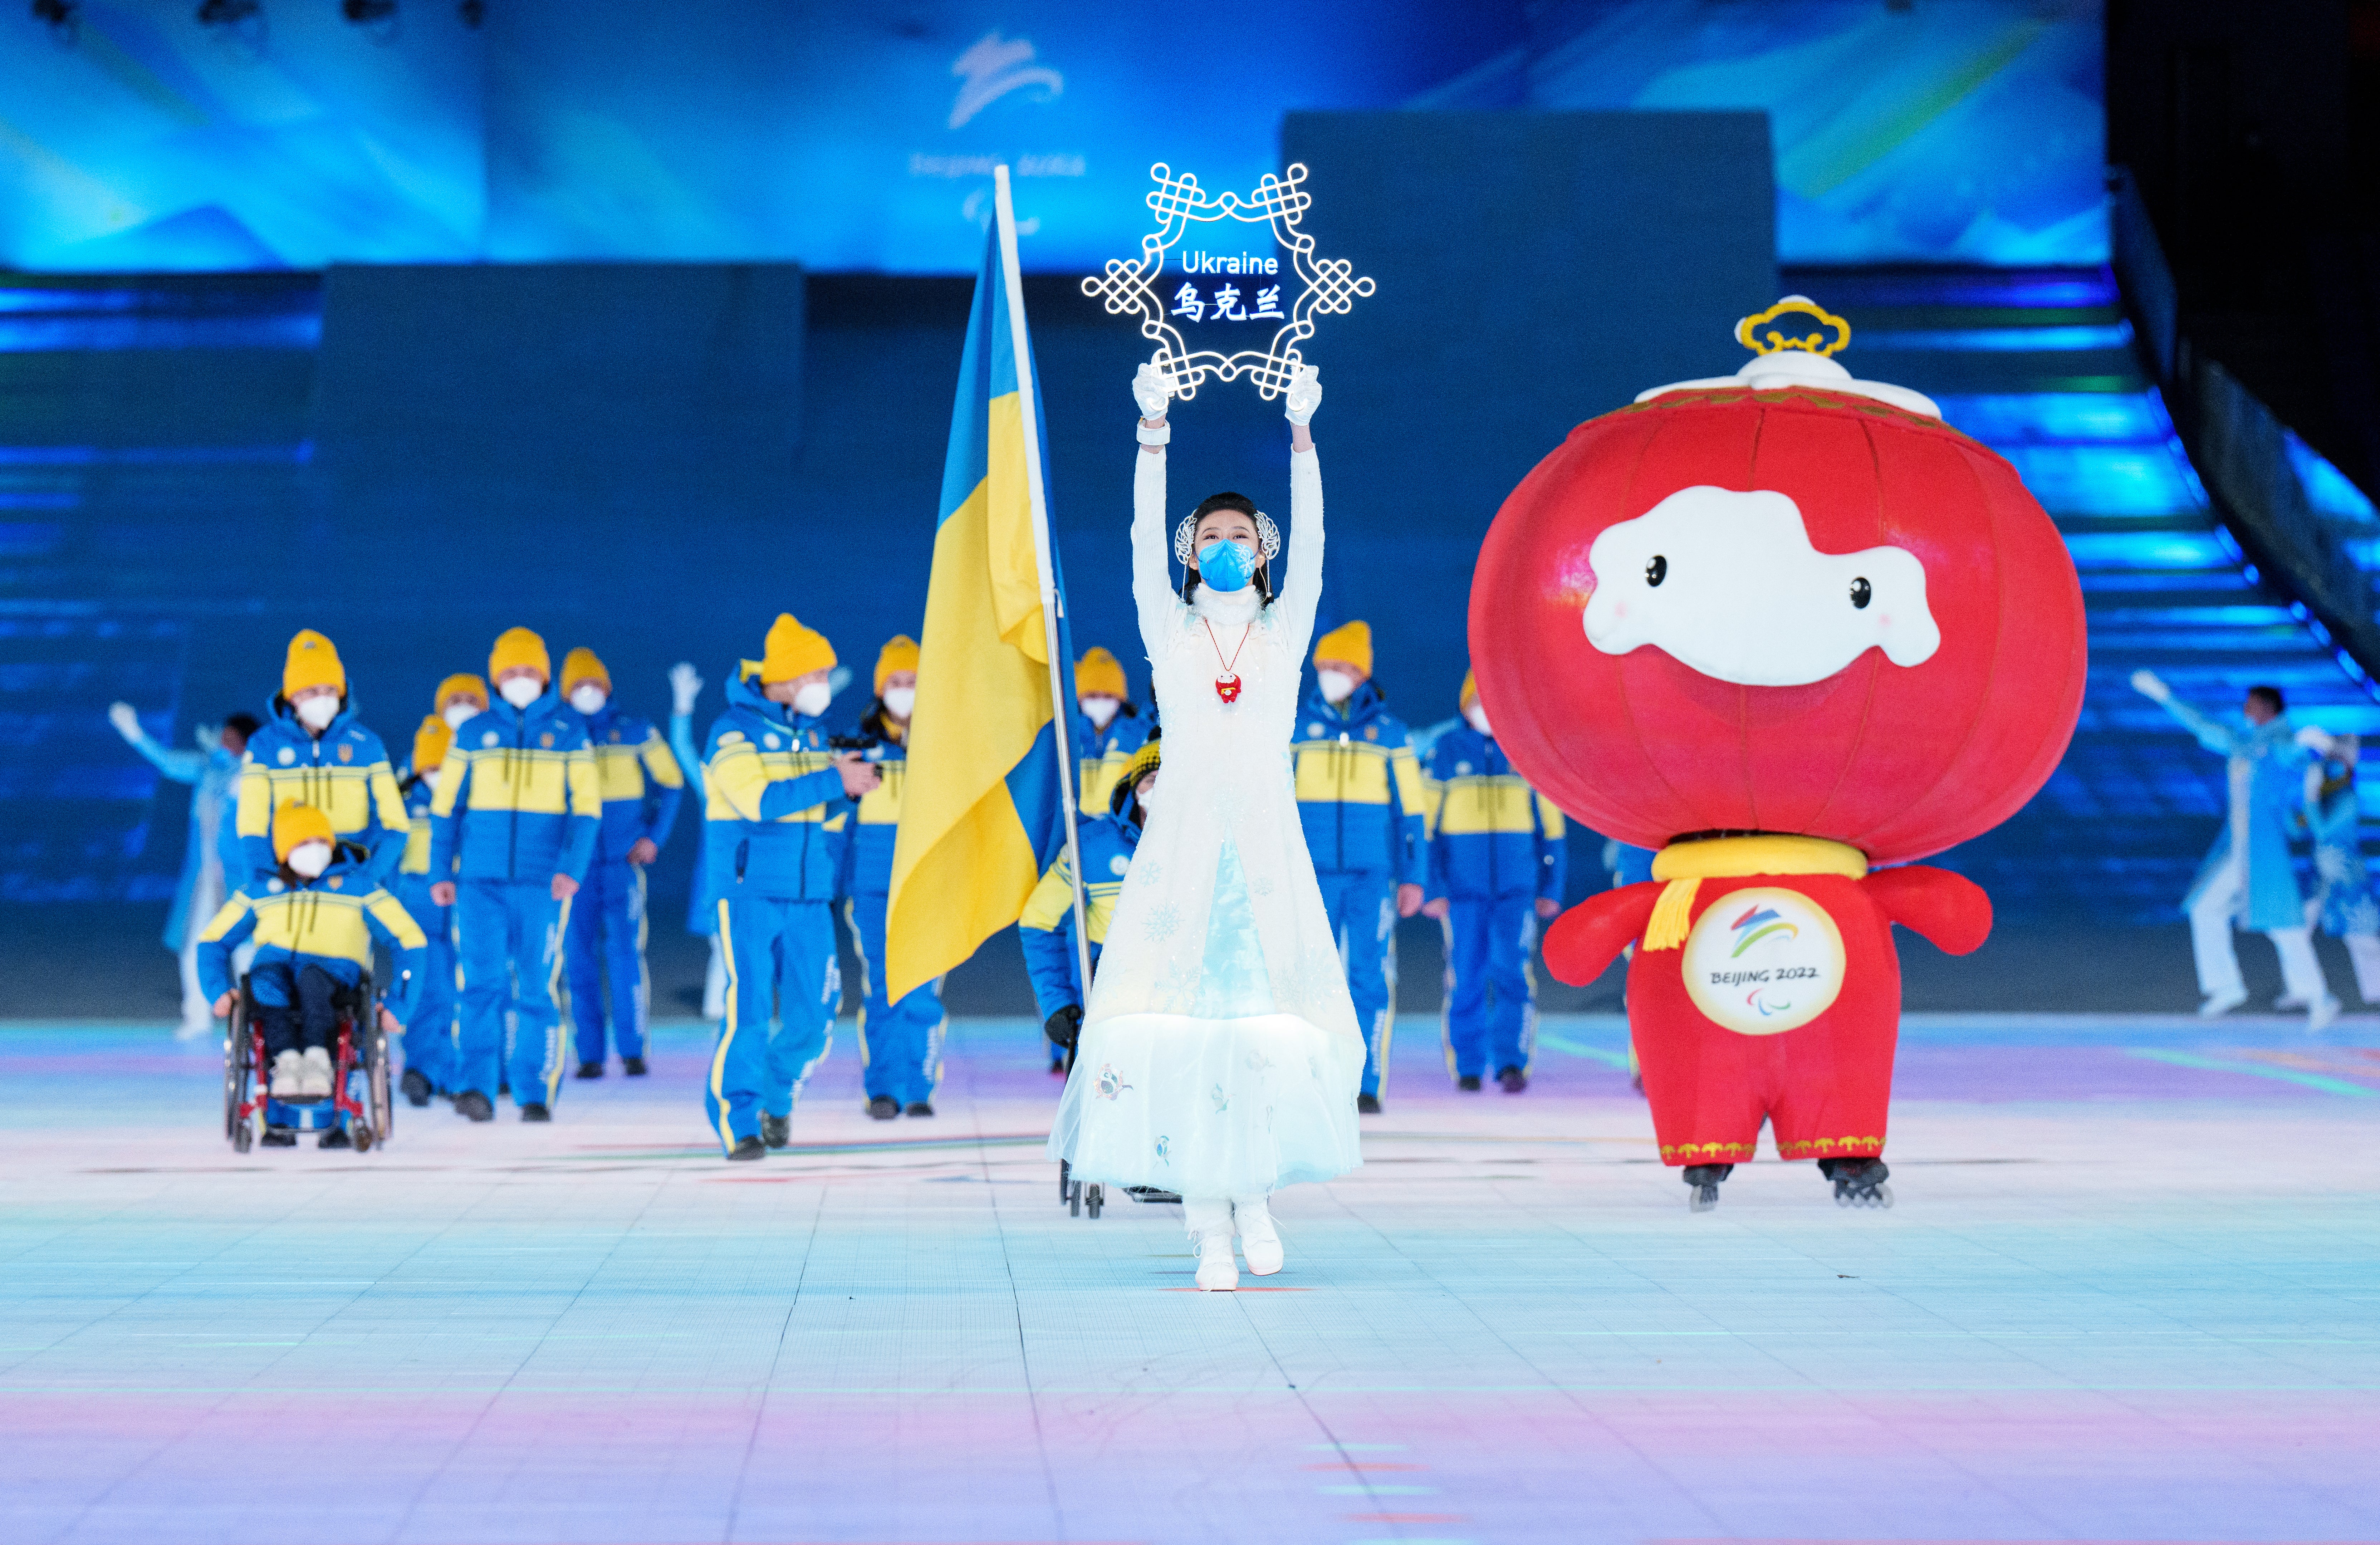 Ukraine managed to send a full delegation of 20 athletes and nine guides to Beijing (Joe Toth for OIS/PA)